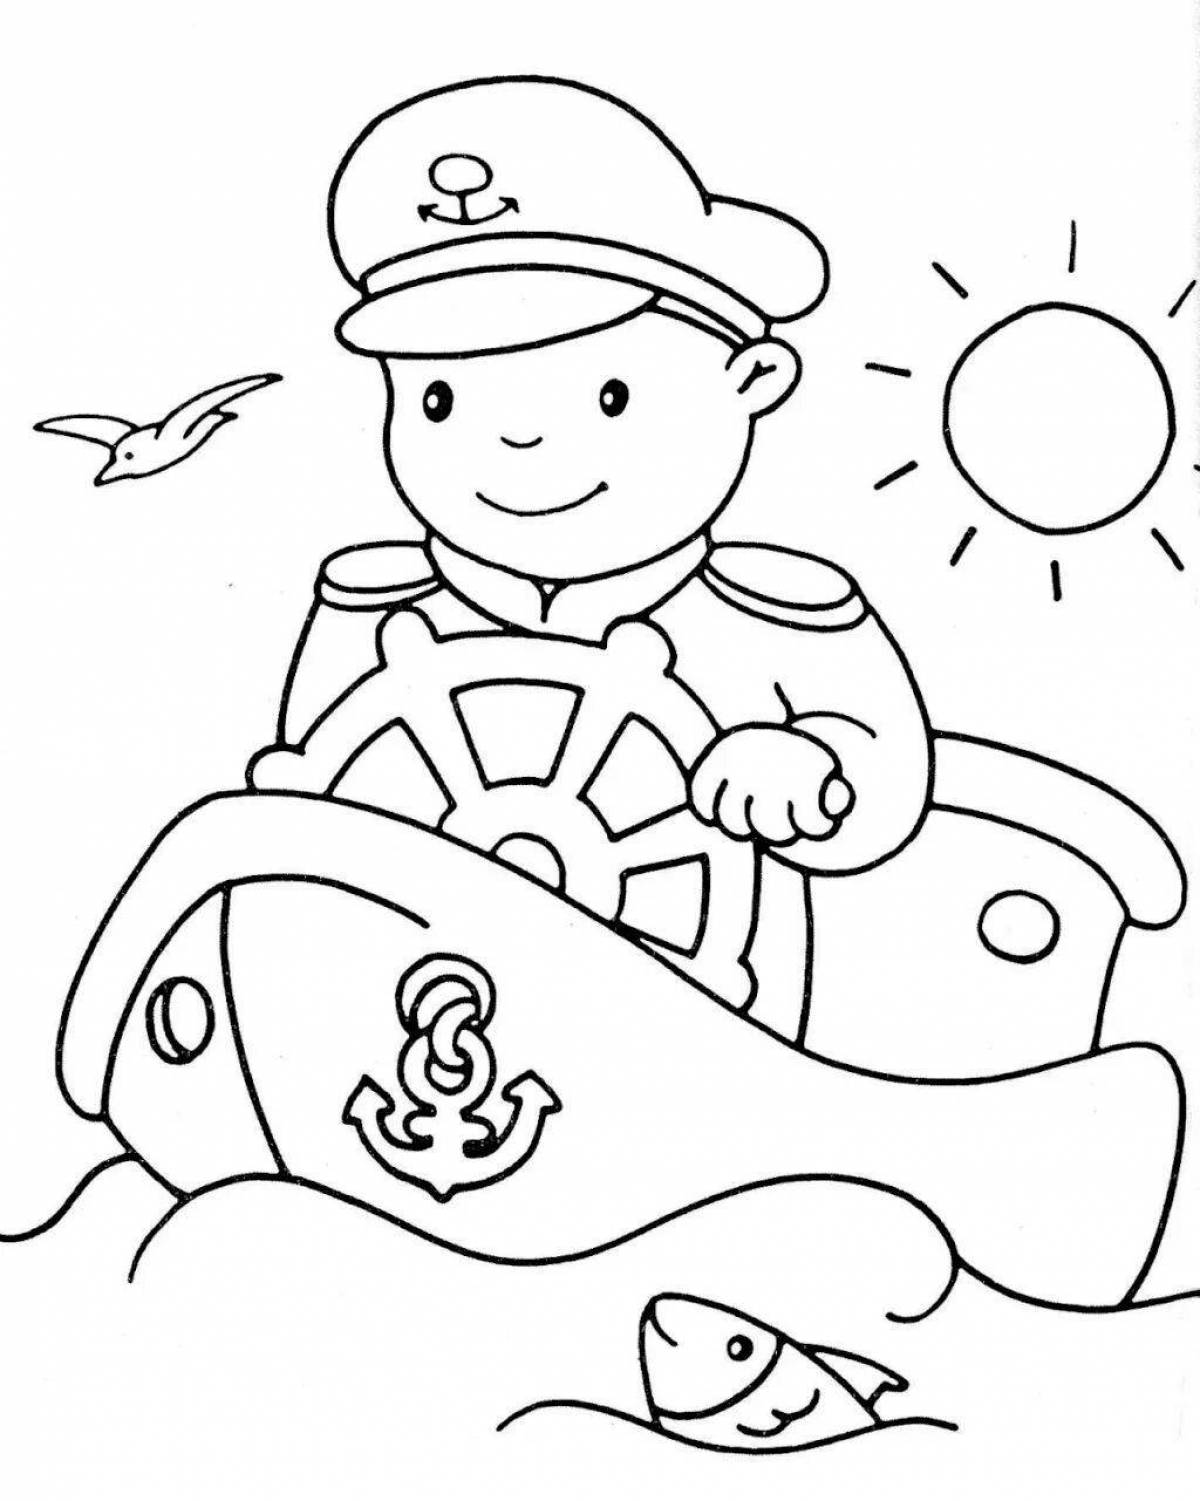 Coloring page wild February 23